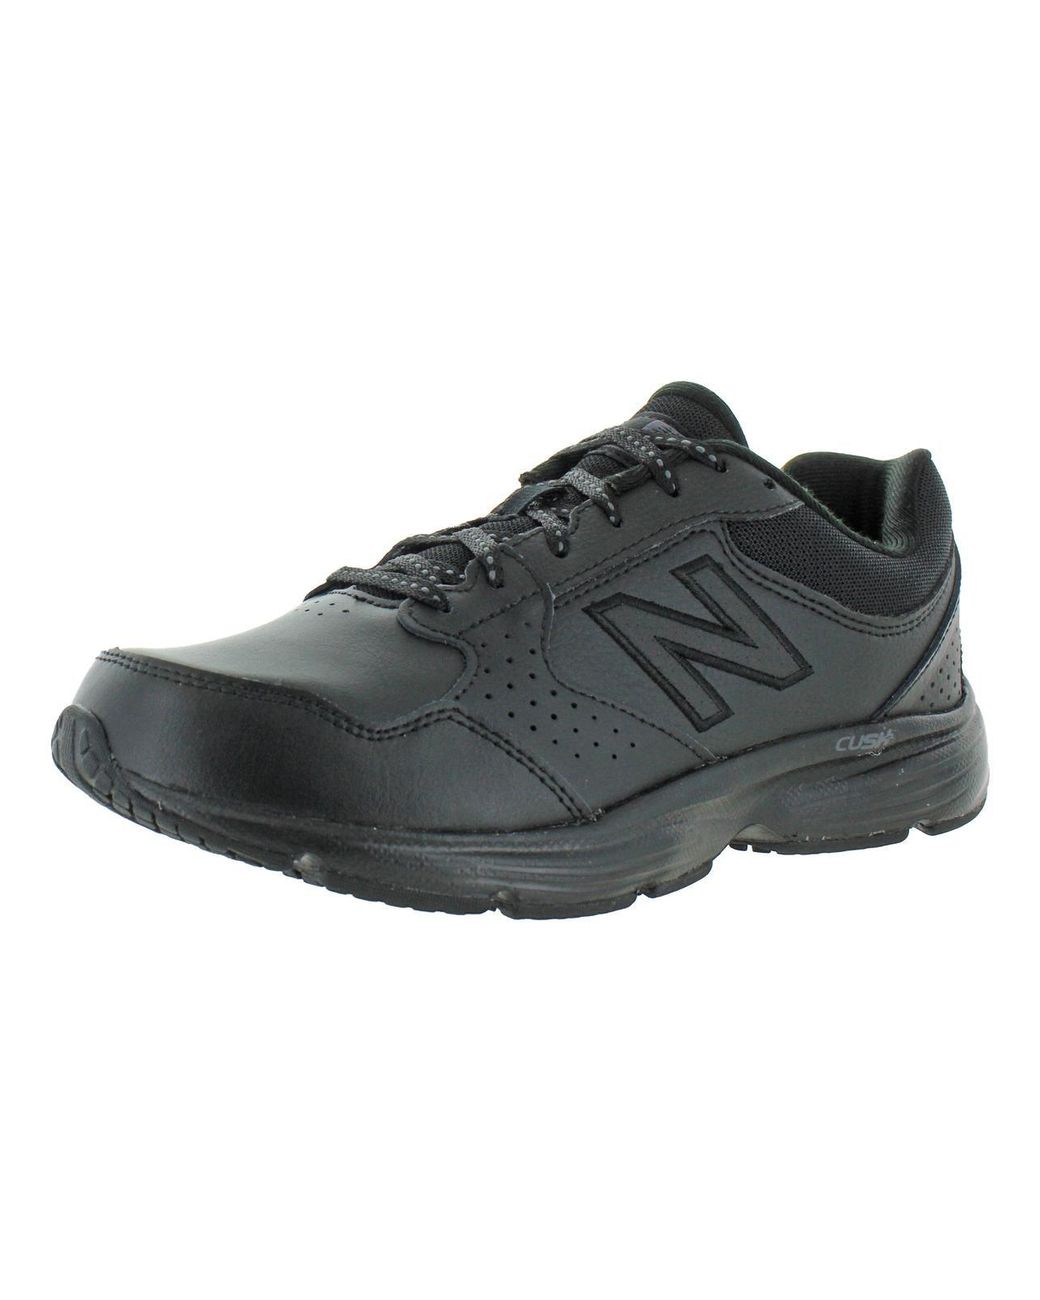 New Balance 411 V1 Faux Leather Comfort Walking Shoes in Black | Lyst